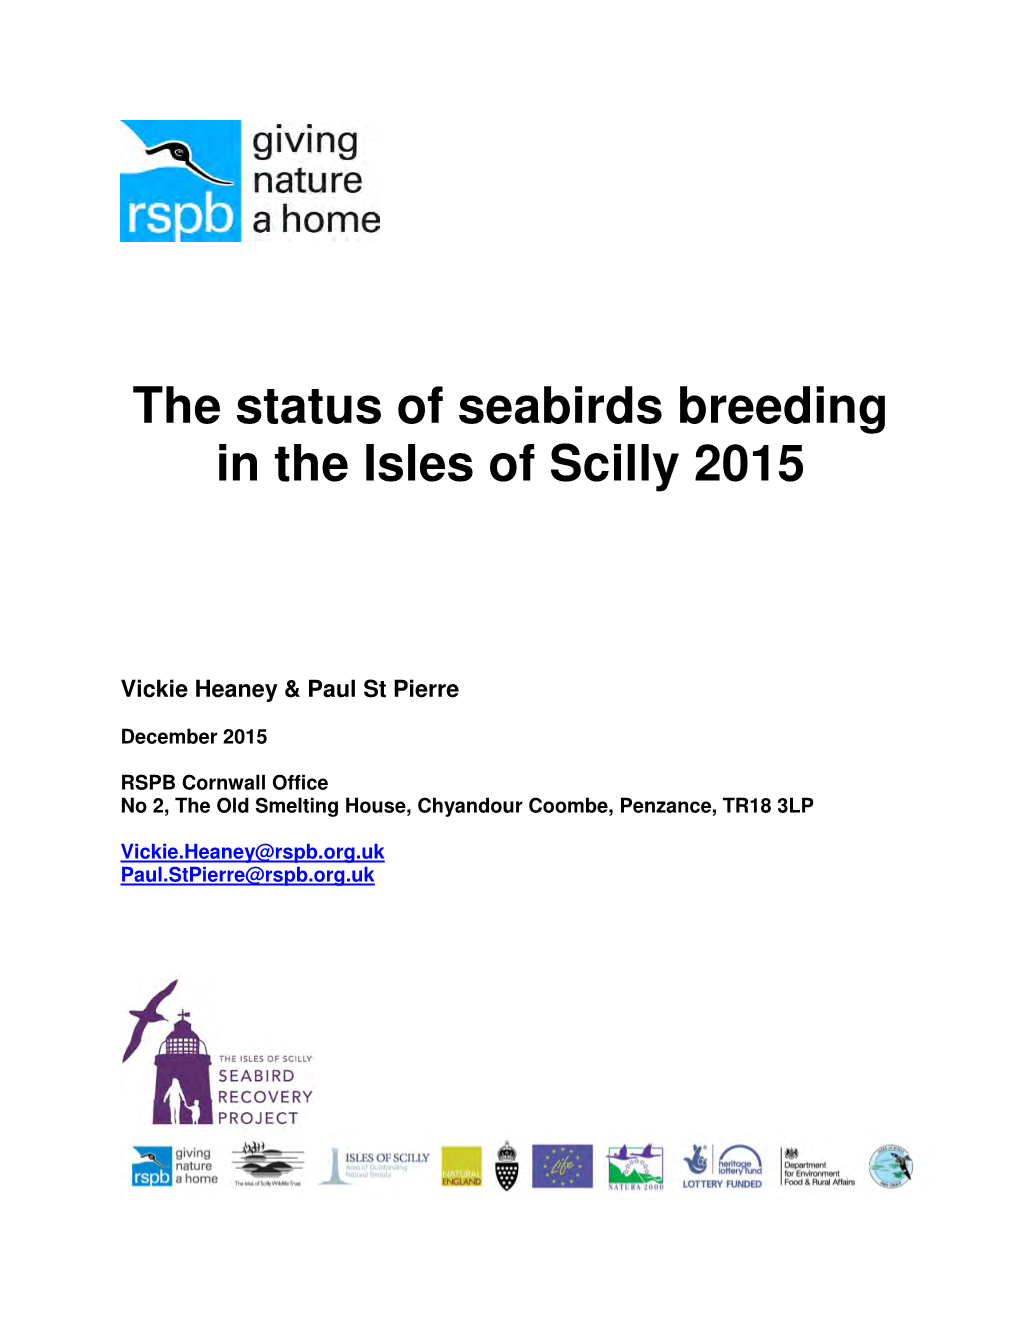 The Status of Seabirds Breeding in the Isles of Scilly 2015